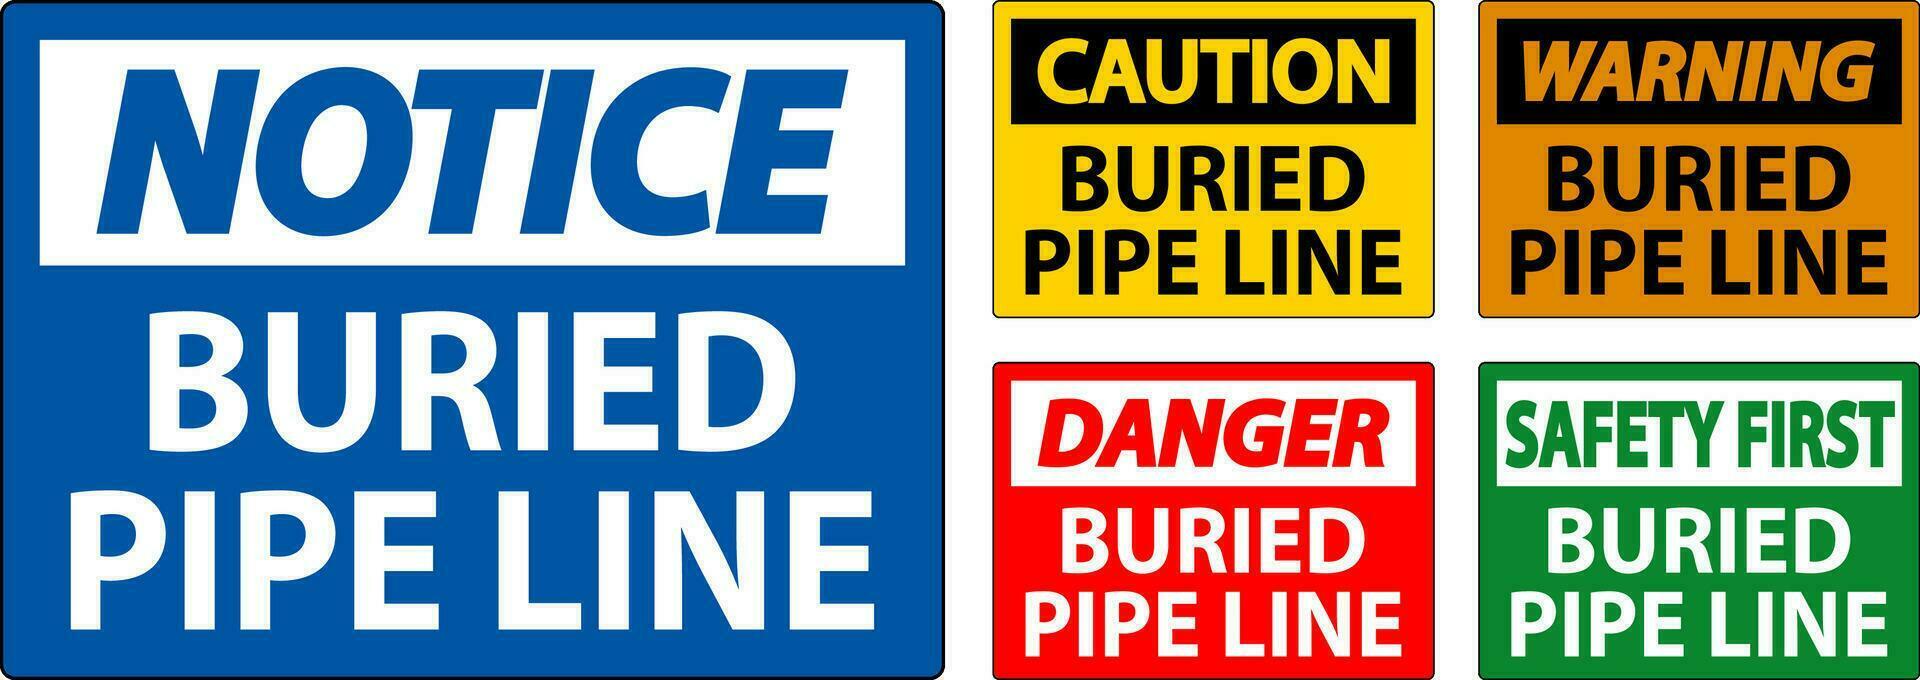 Caution Sign Buried Pipe Line On White Background vector